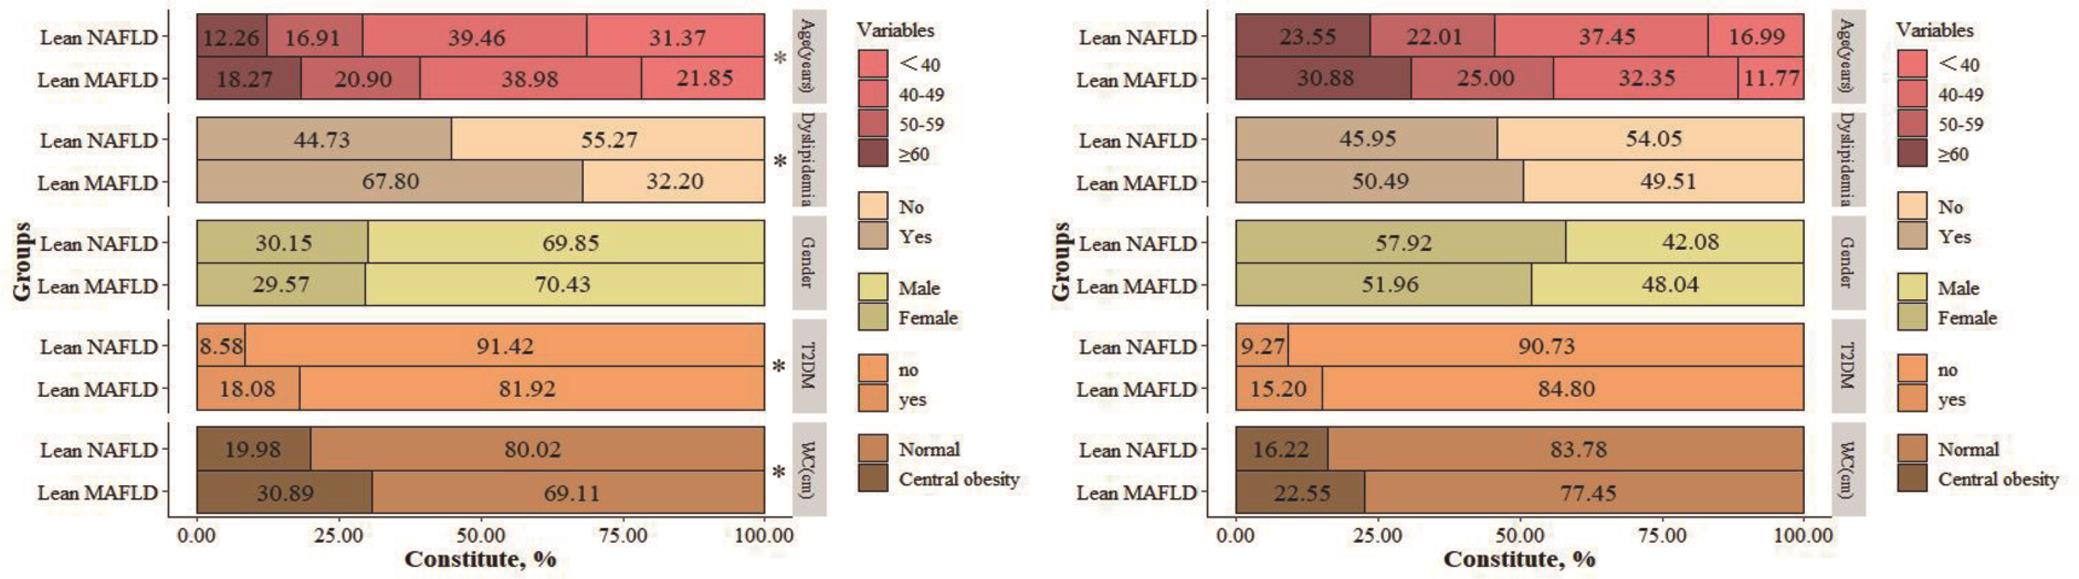 Comparison of lean MAFLD and lean NAFLD at different high-risk factors.